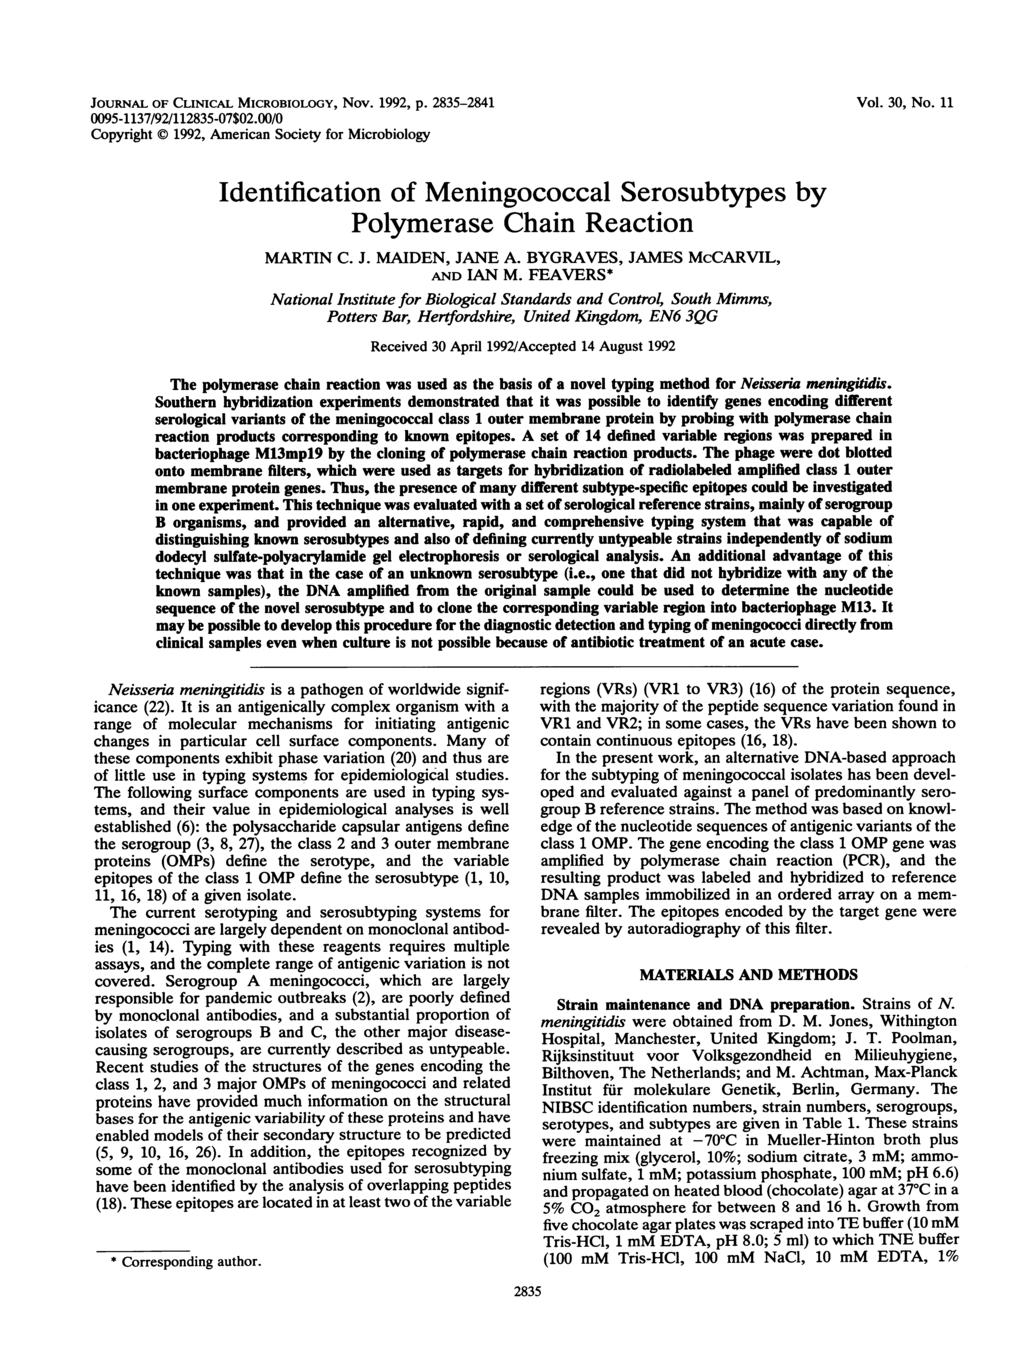 JOURNAL OF CLINICAL MICROBIOLOGY, Nov. 1992, p. 2835-2841 0095-1137/92/112835-07$02.00/0 Copyright X 1992, American Society for Microbiology Vol. 30, No.